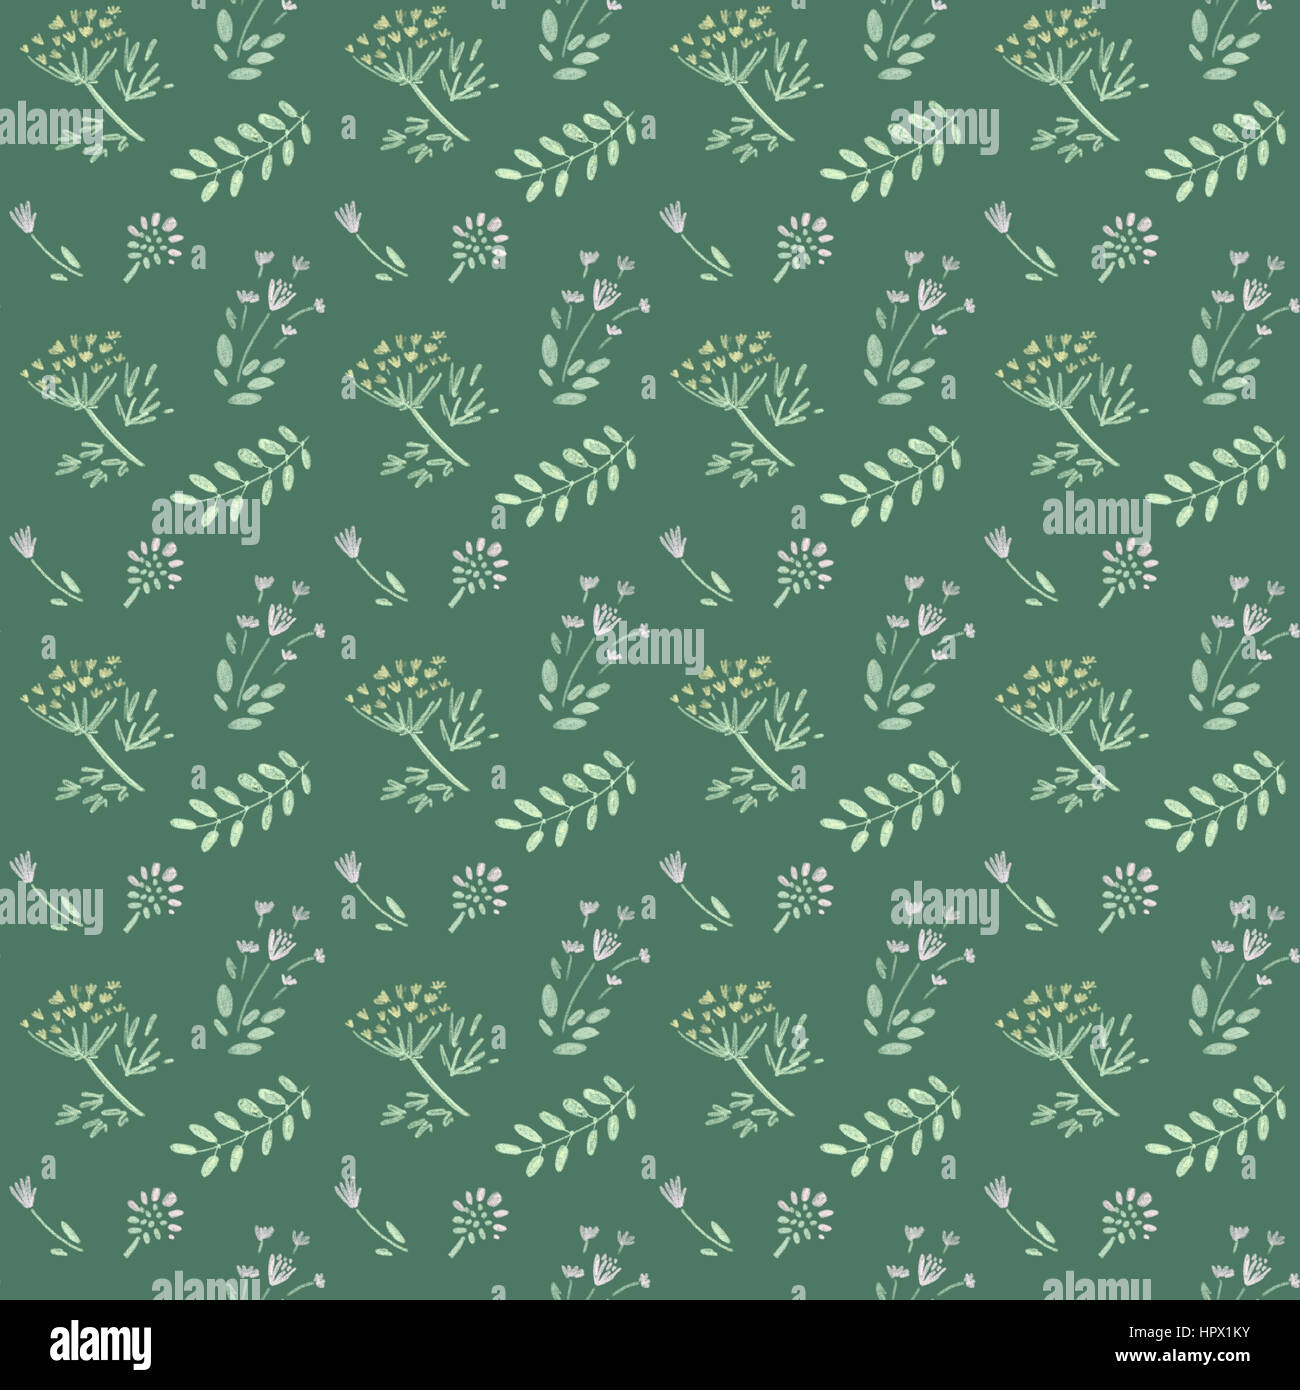 Seamless pattern with cute little flowers Stock Photo